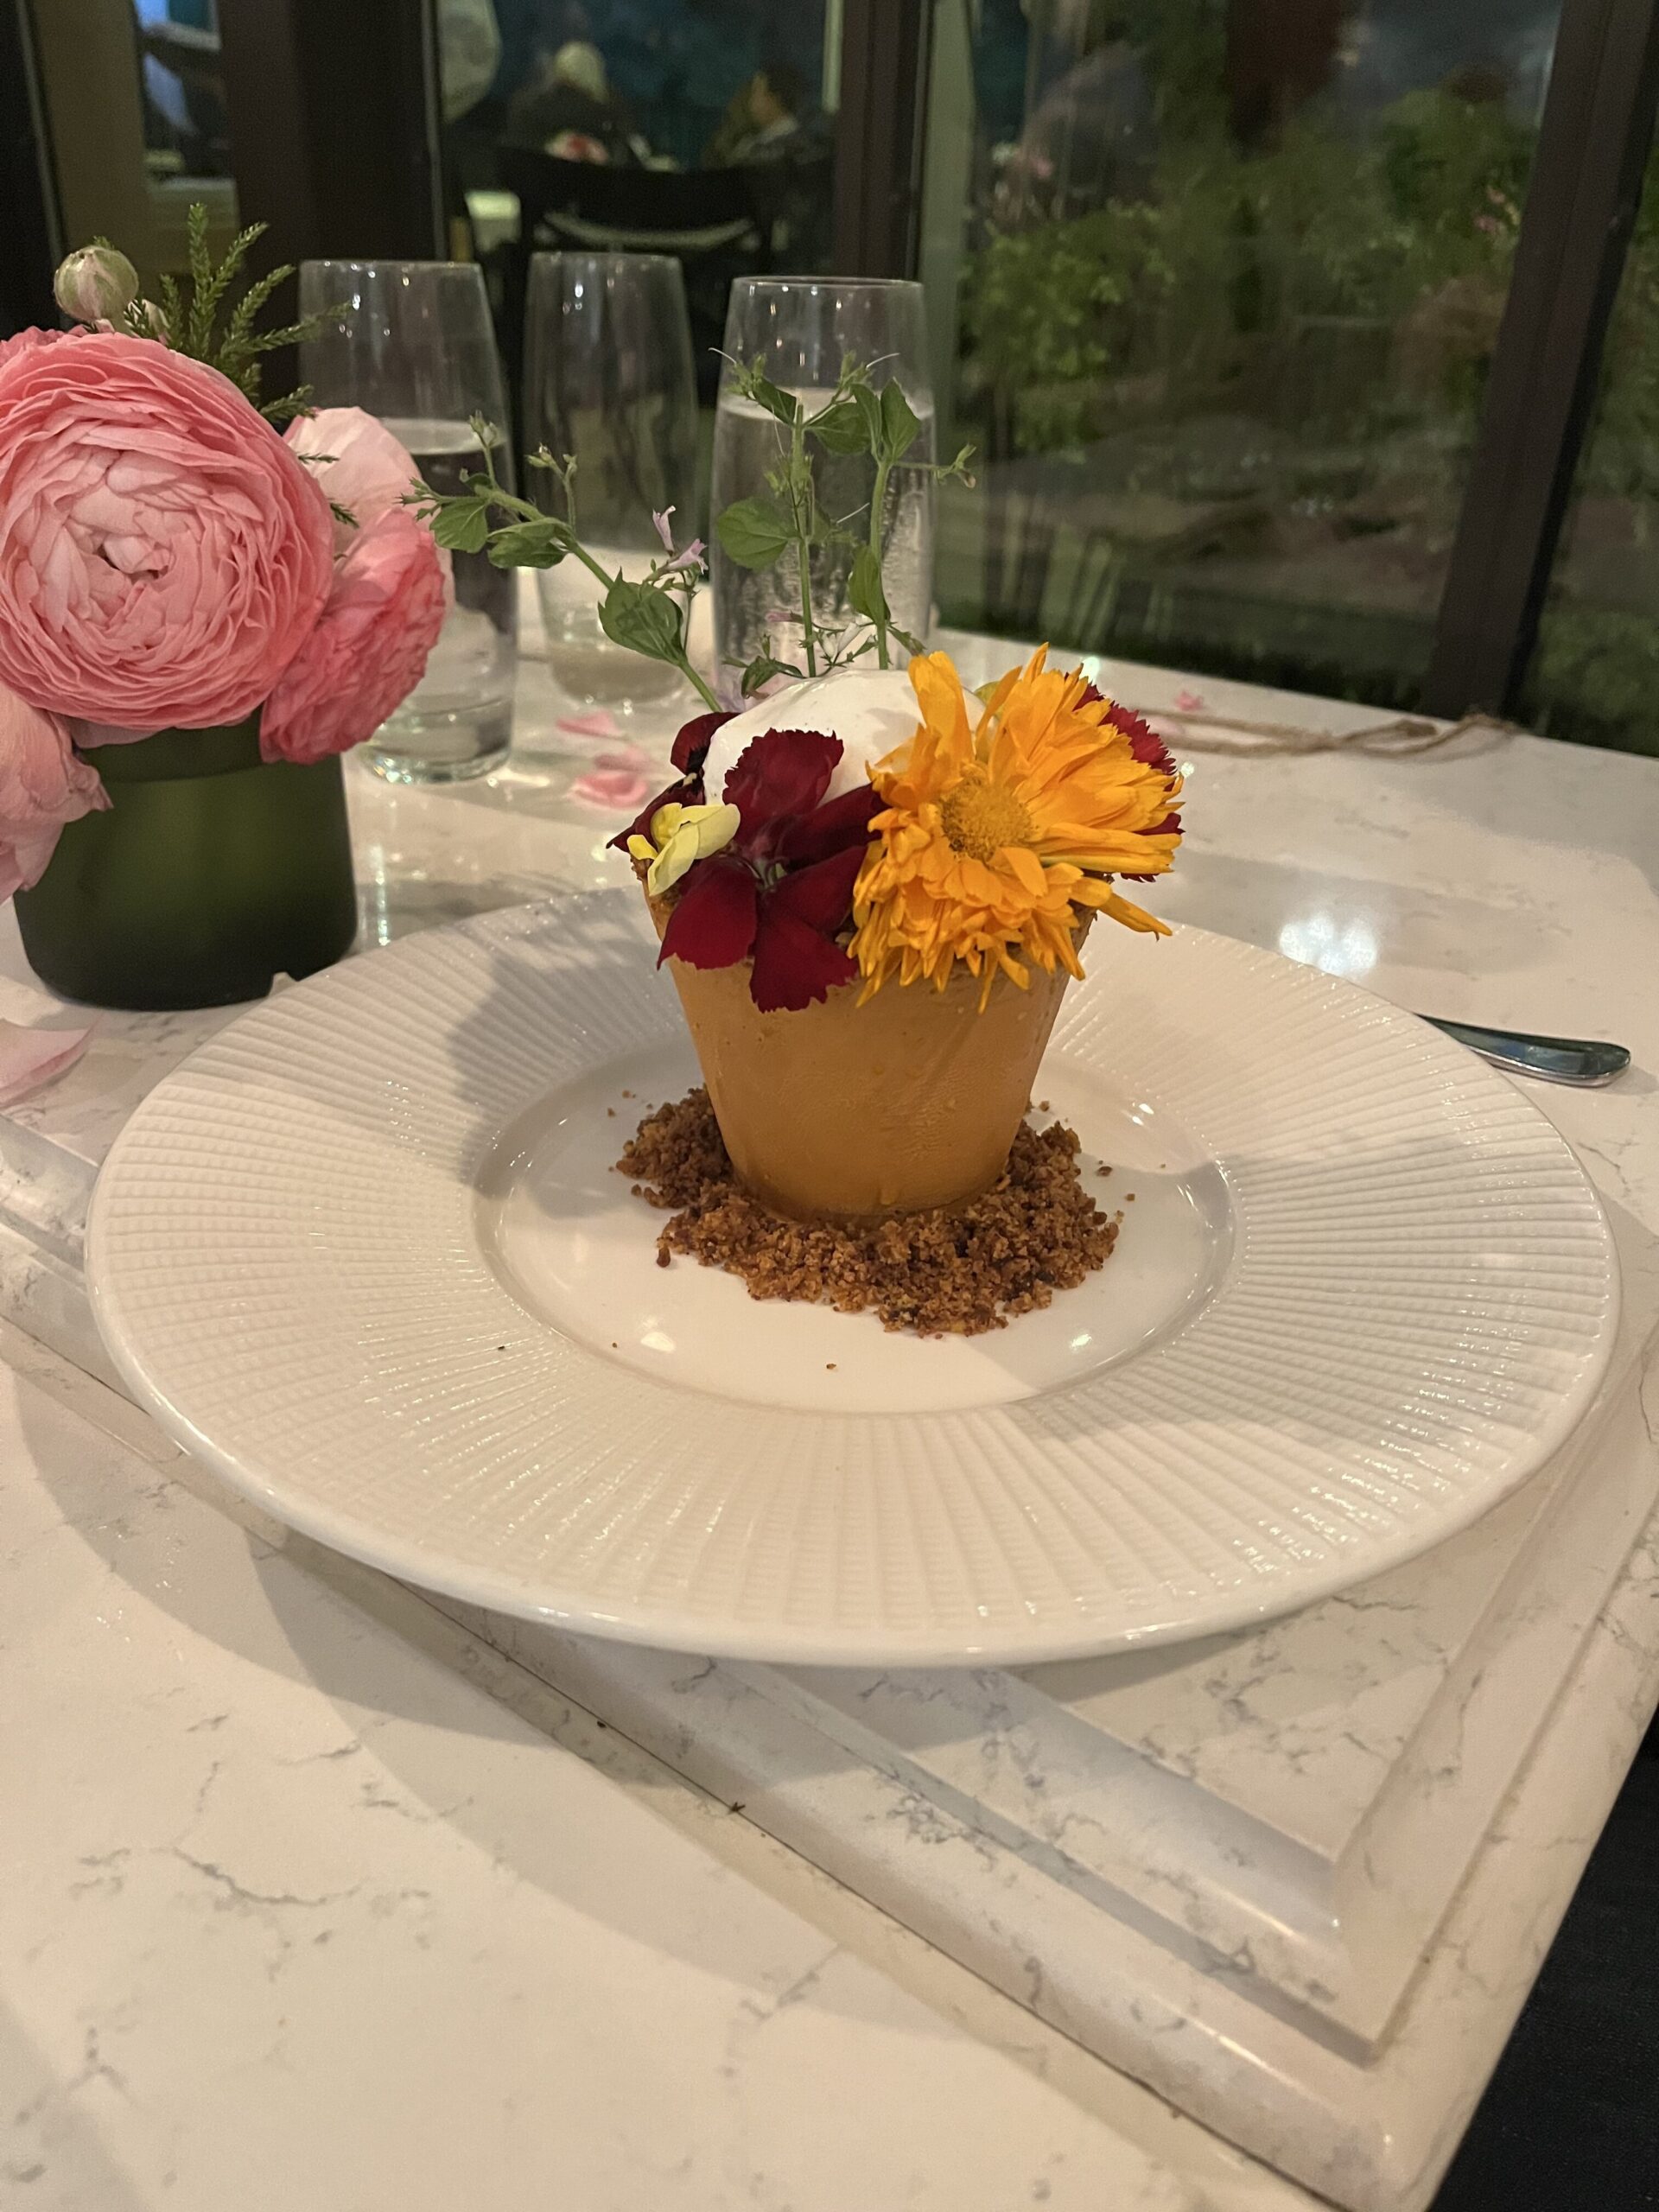 a plate with a cupcake and flowers on it